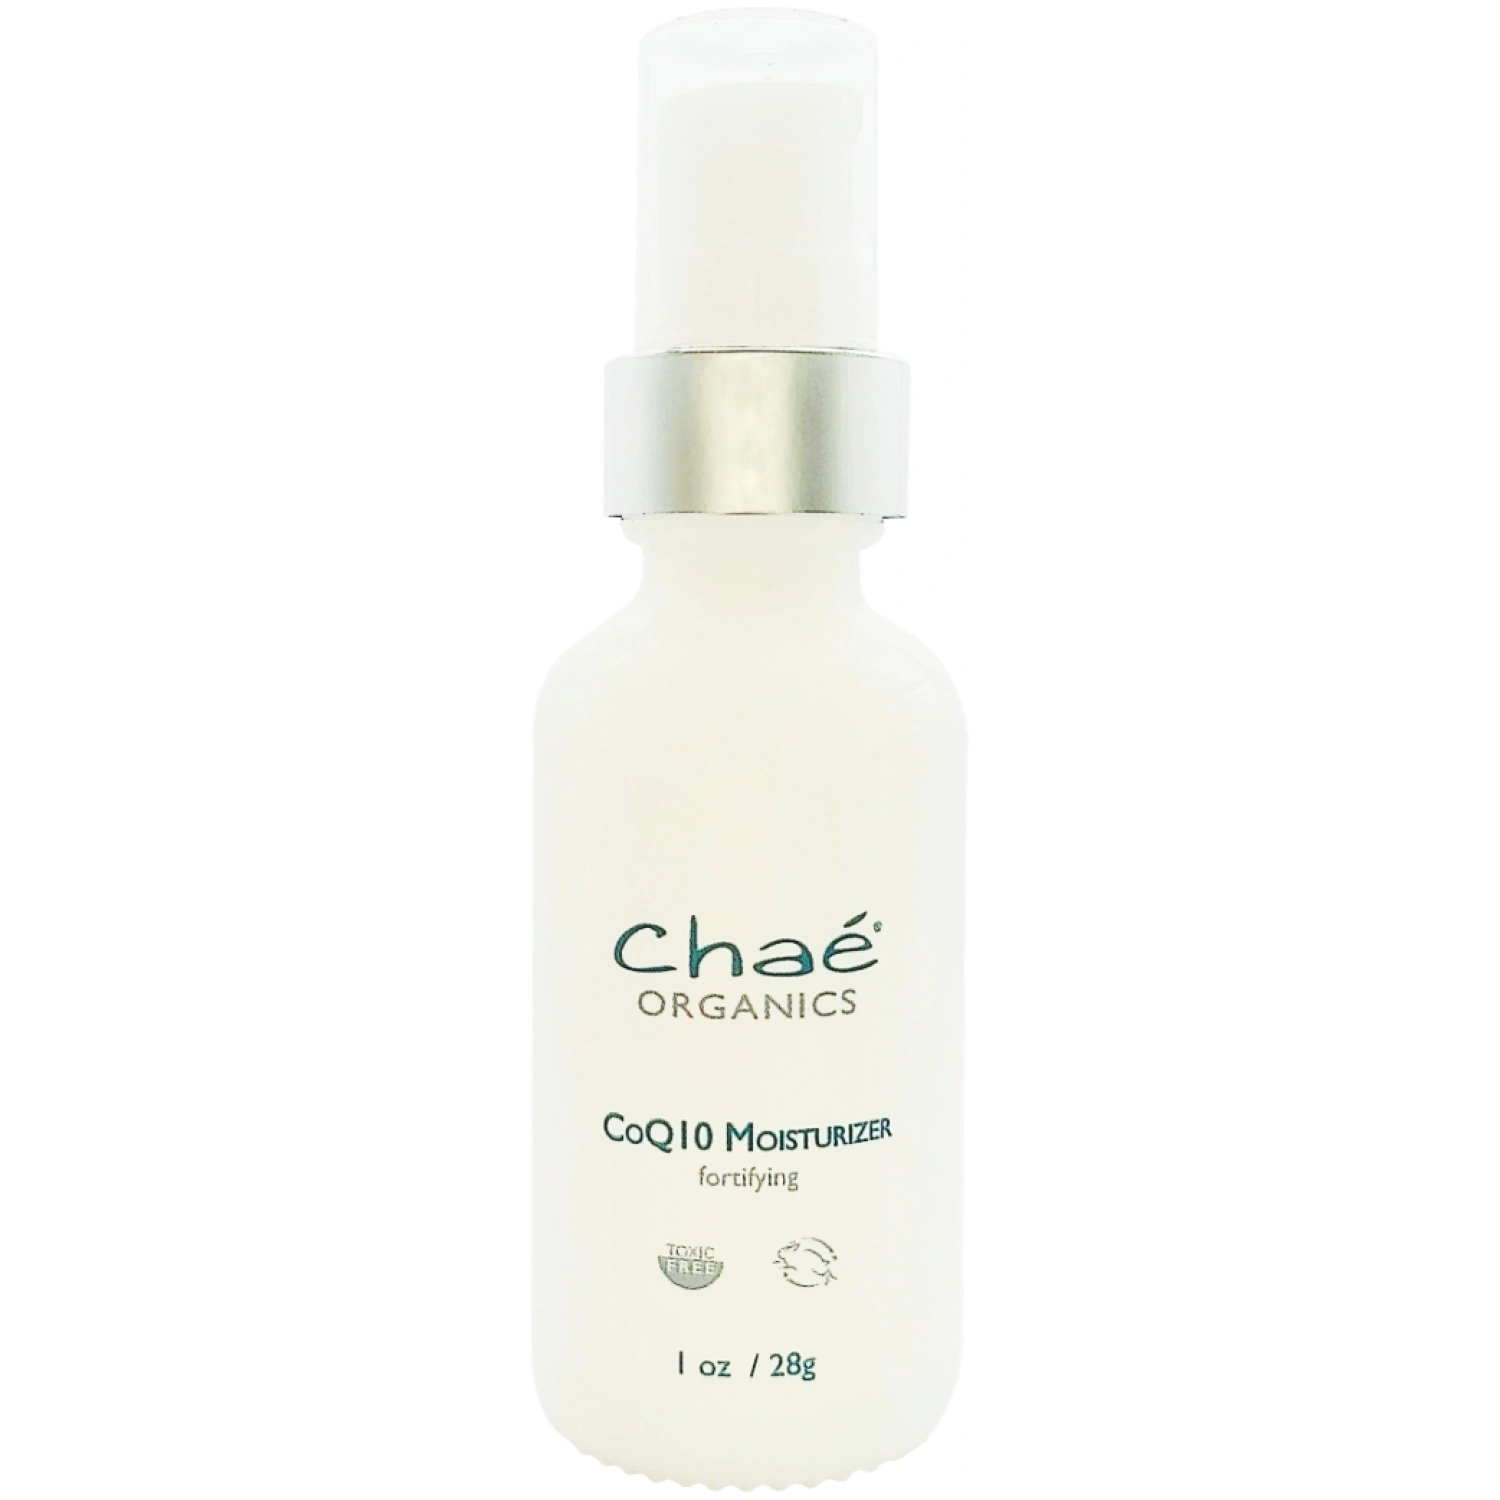 CoQ10 Special Edition Moisturizer in honor of Give Hope. 10% of sales of this product goes to charity.